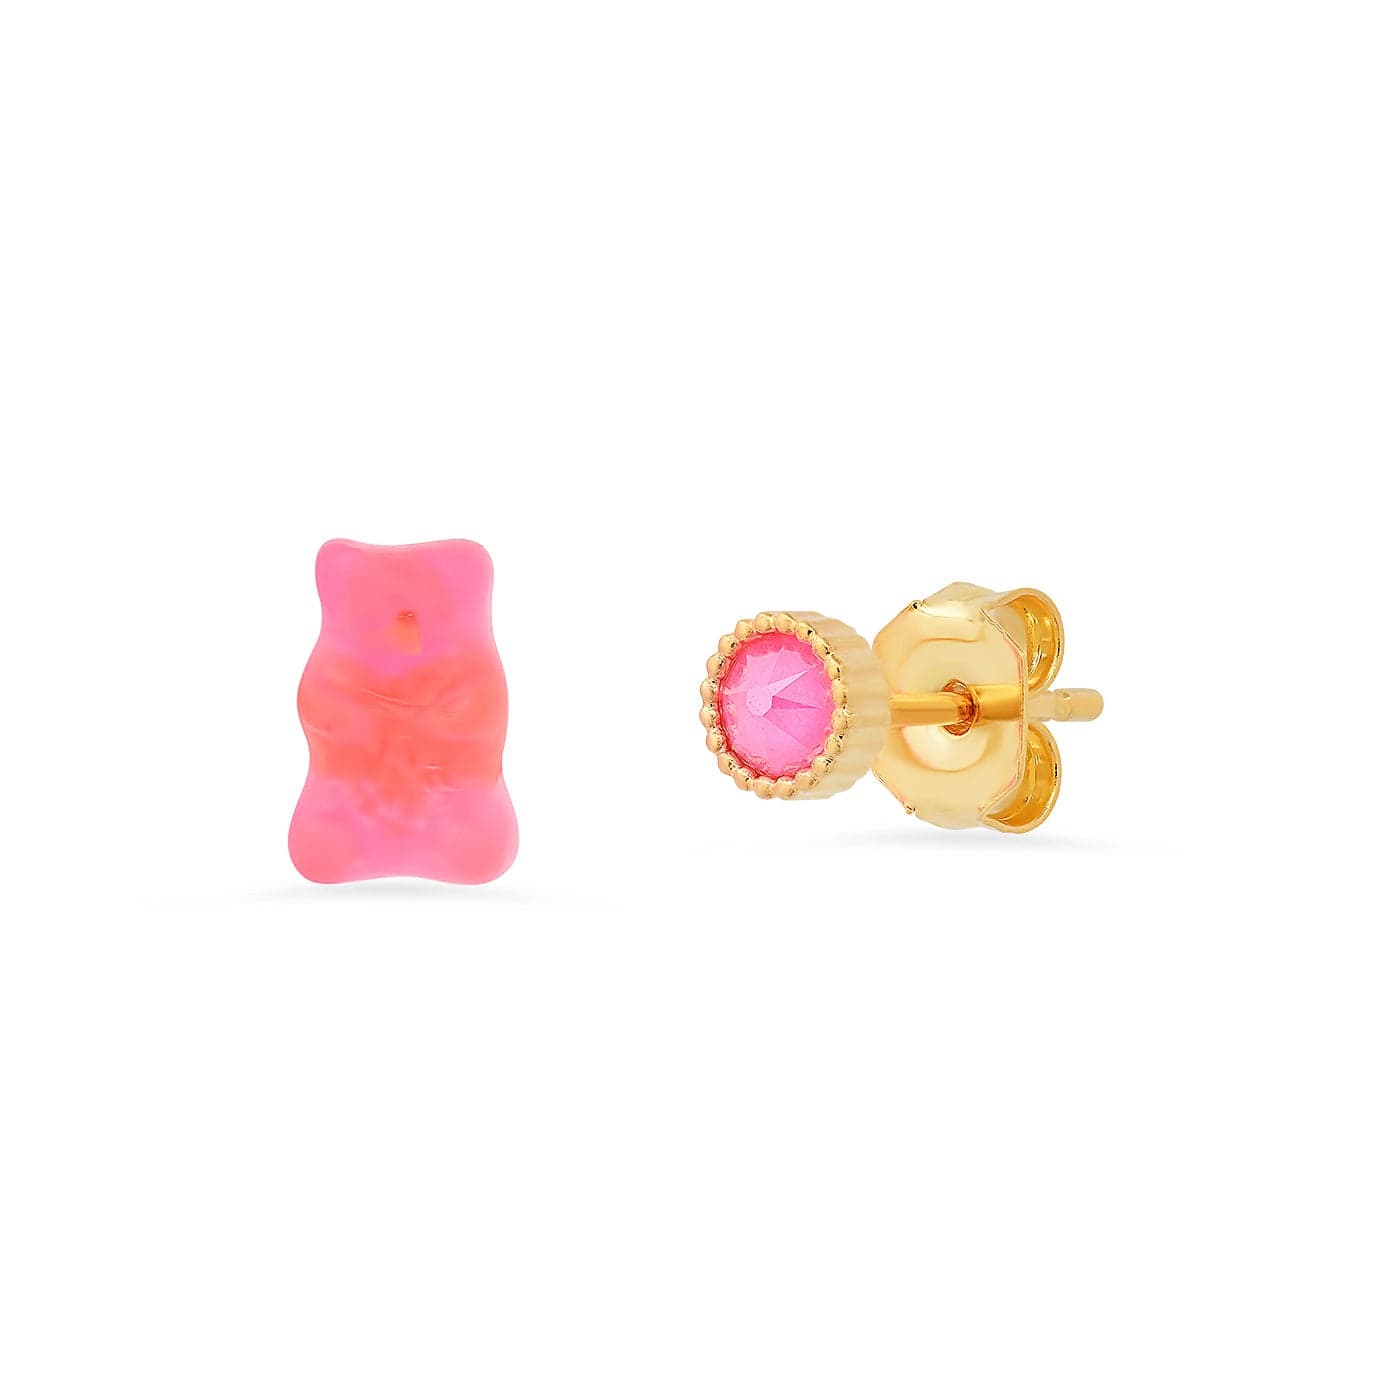 TAI JEWELRY Earrings Pink Gummy Bear Mismatched Studs